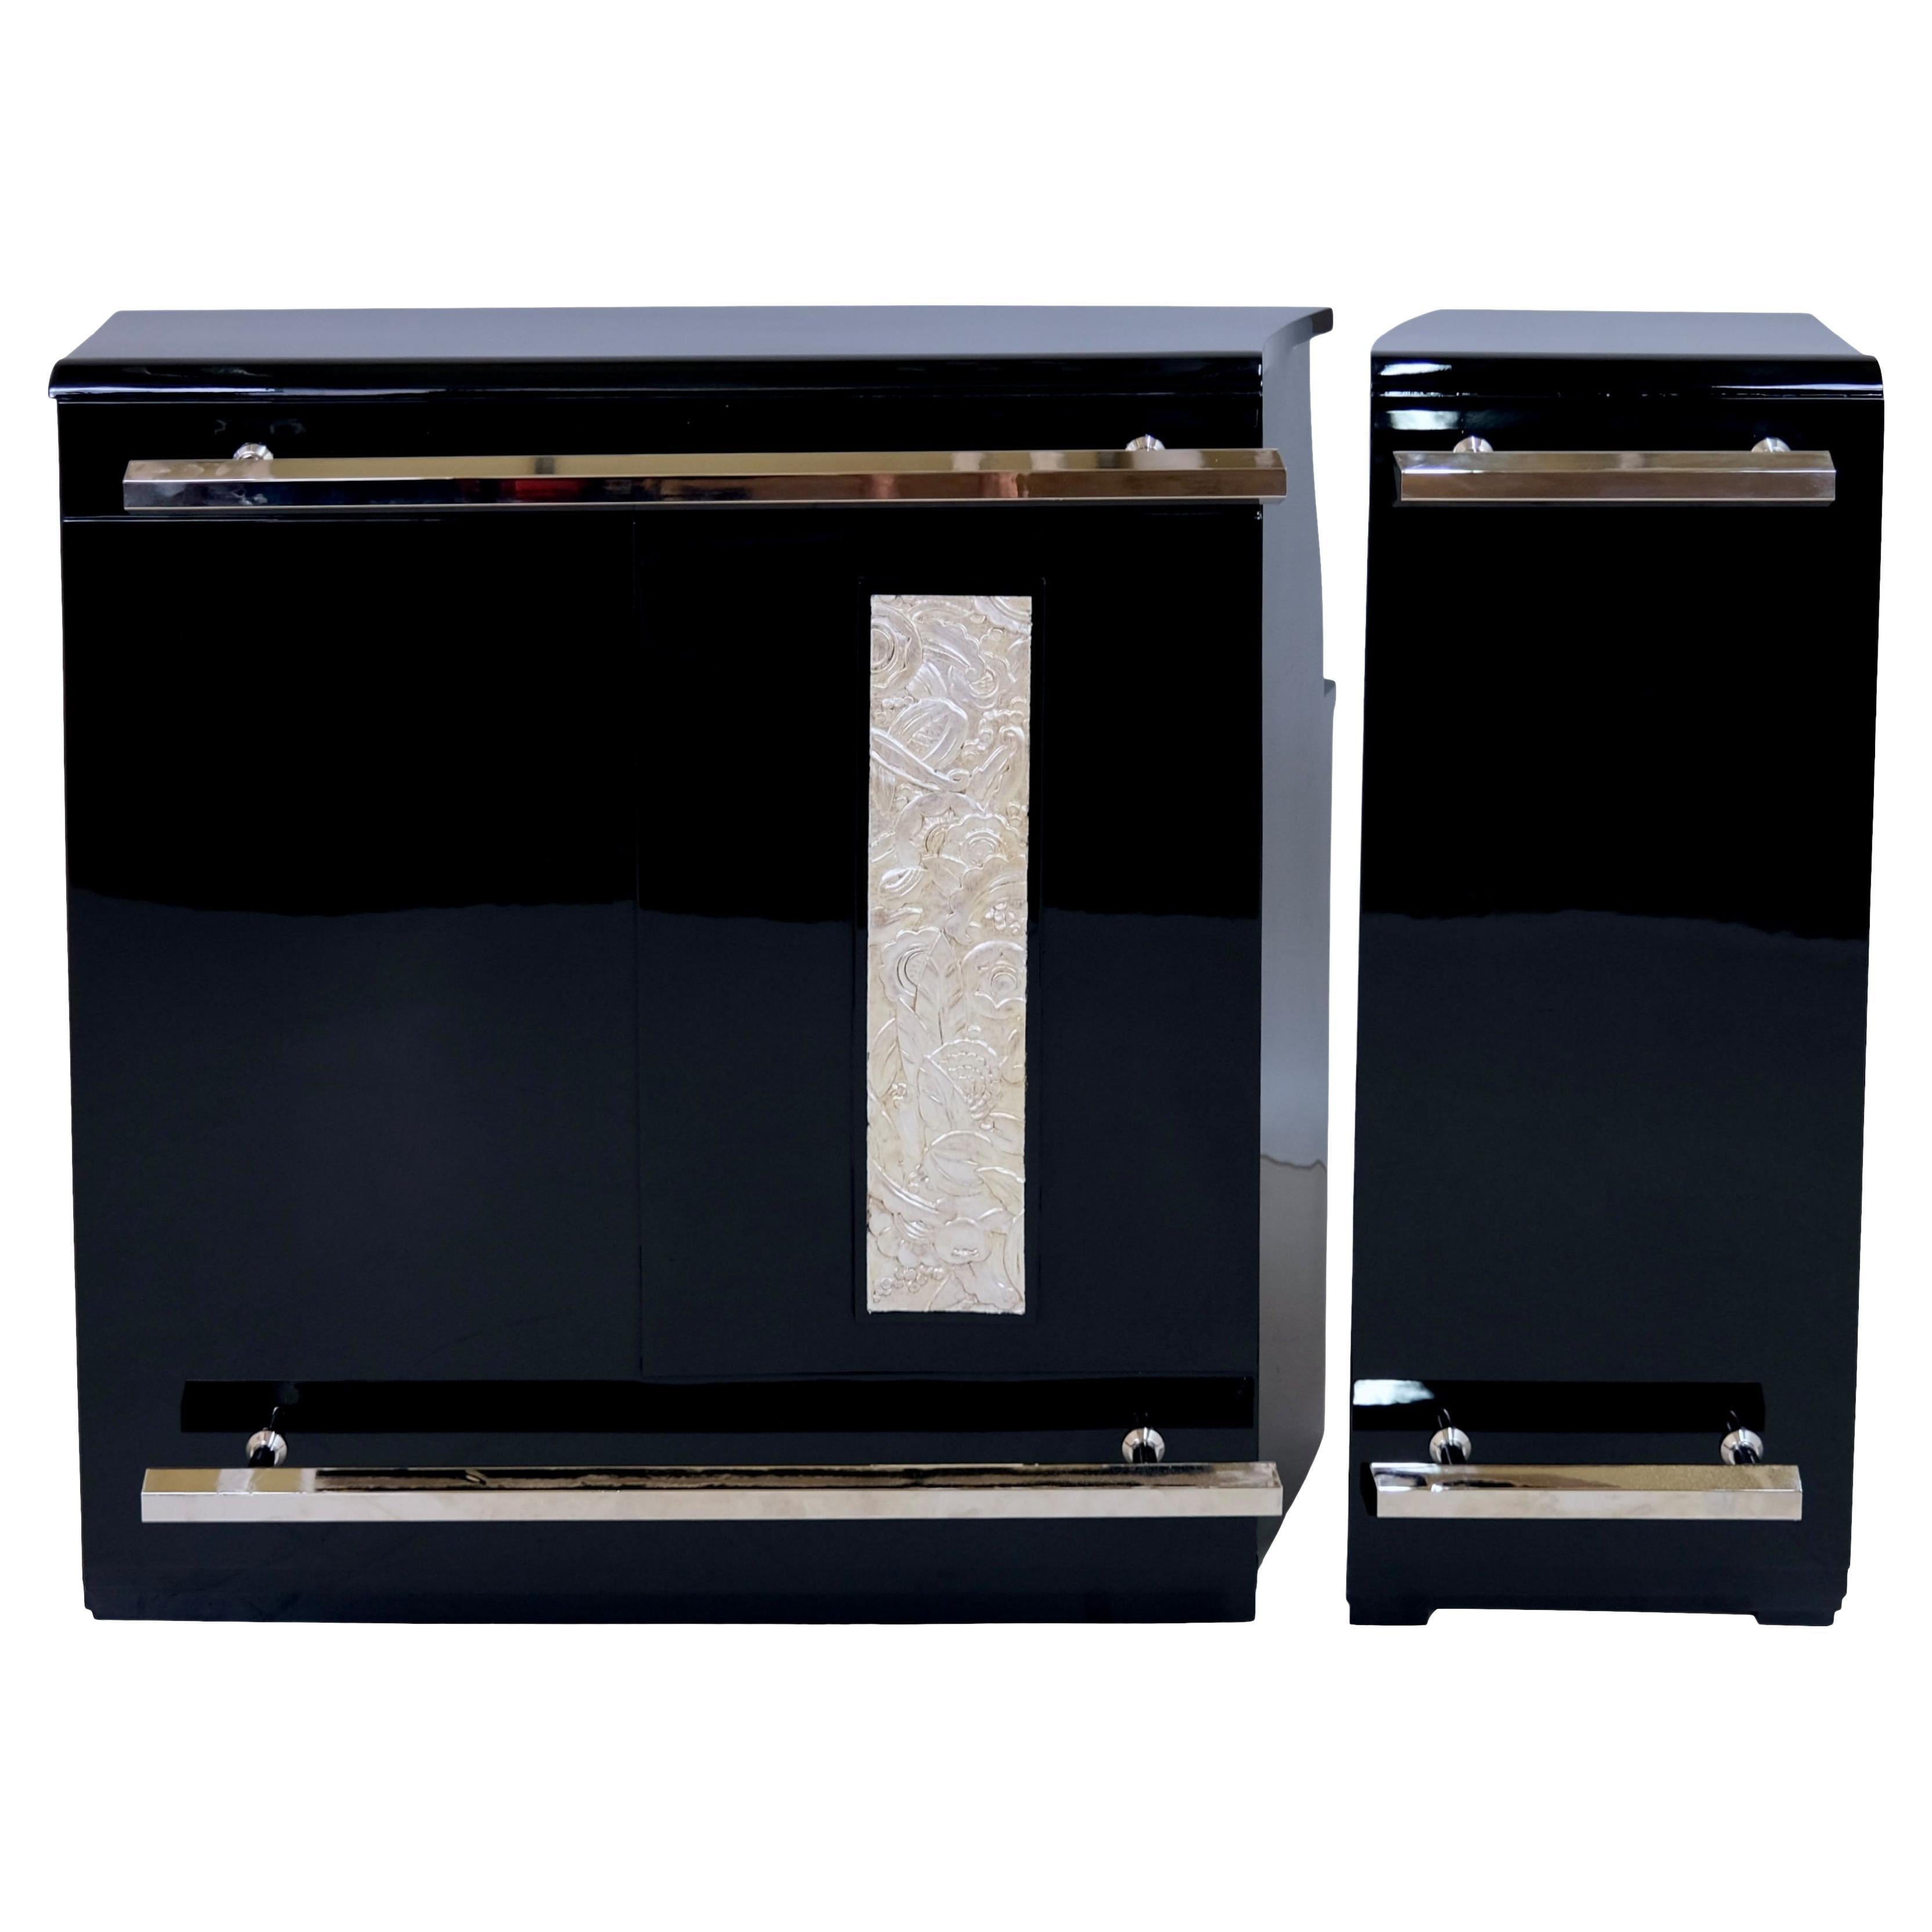 1930's French Art Deco Dry Bar Furniture in Black Lacquer with Side Element For Sale